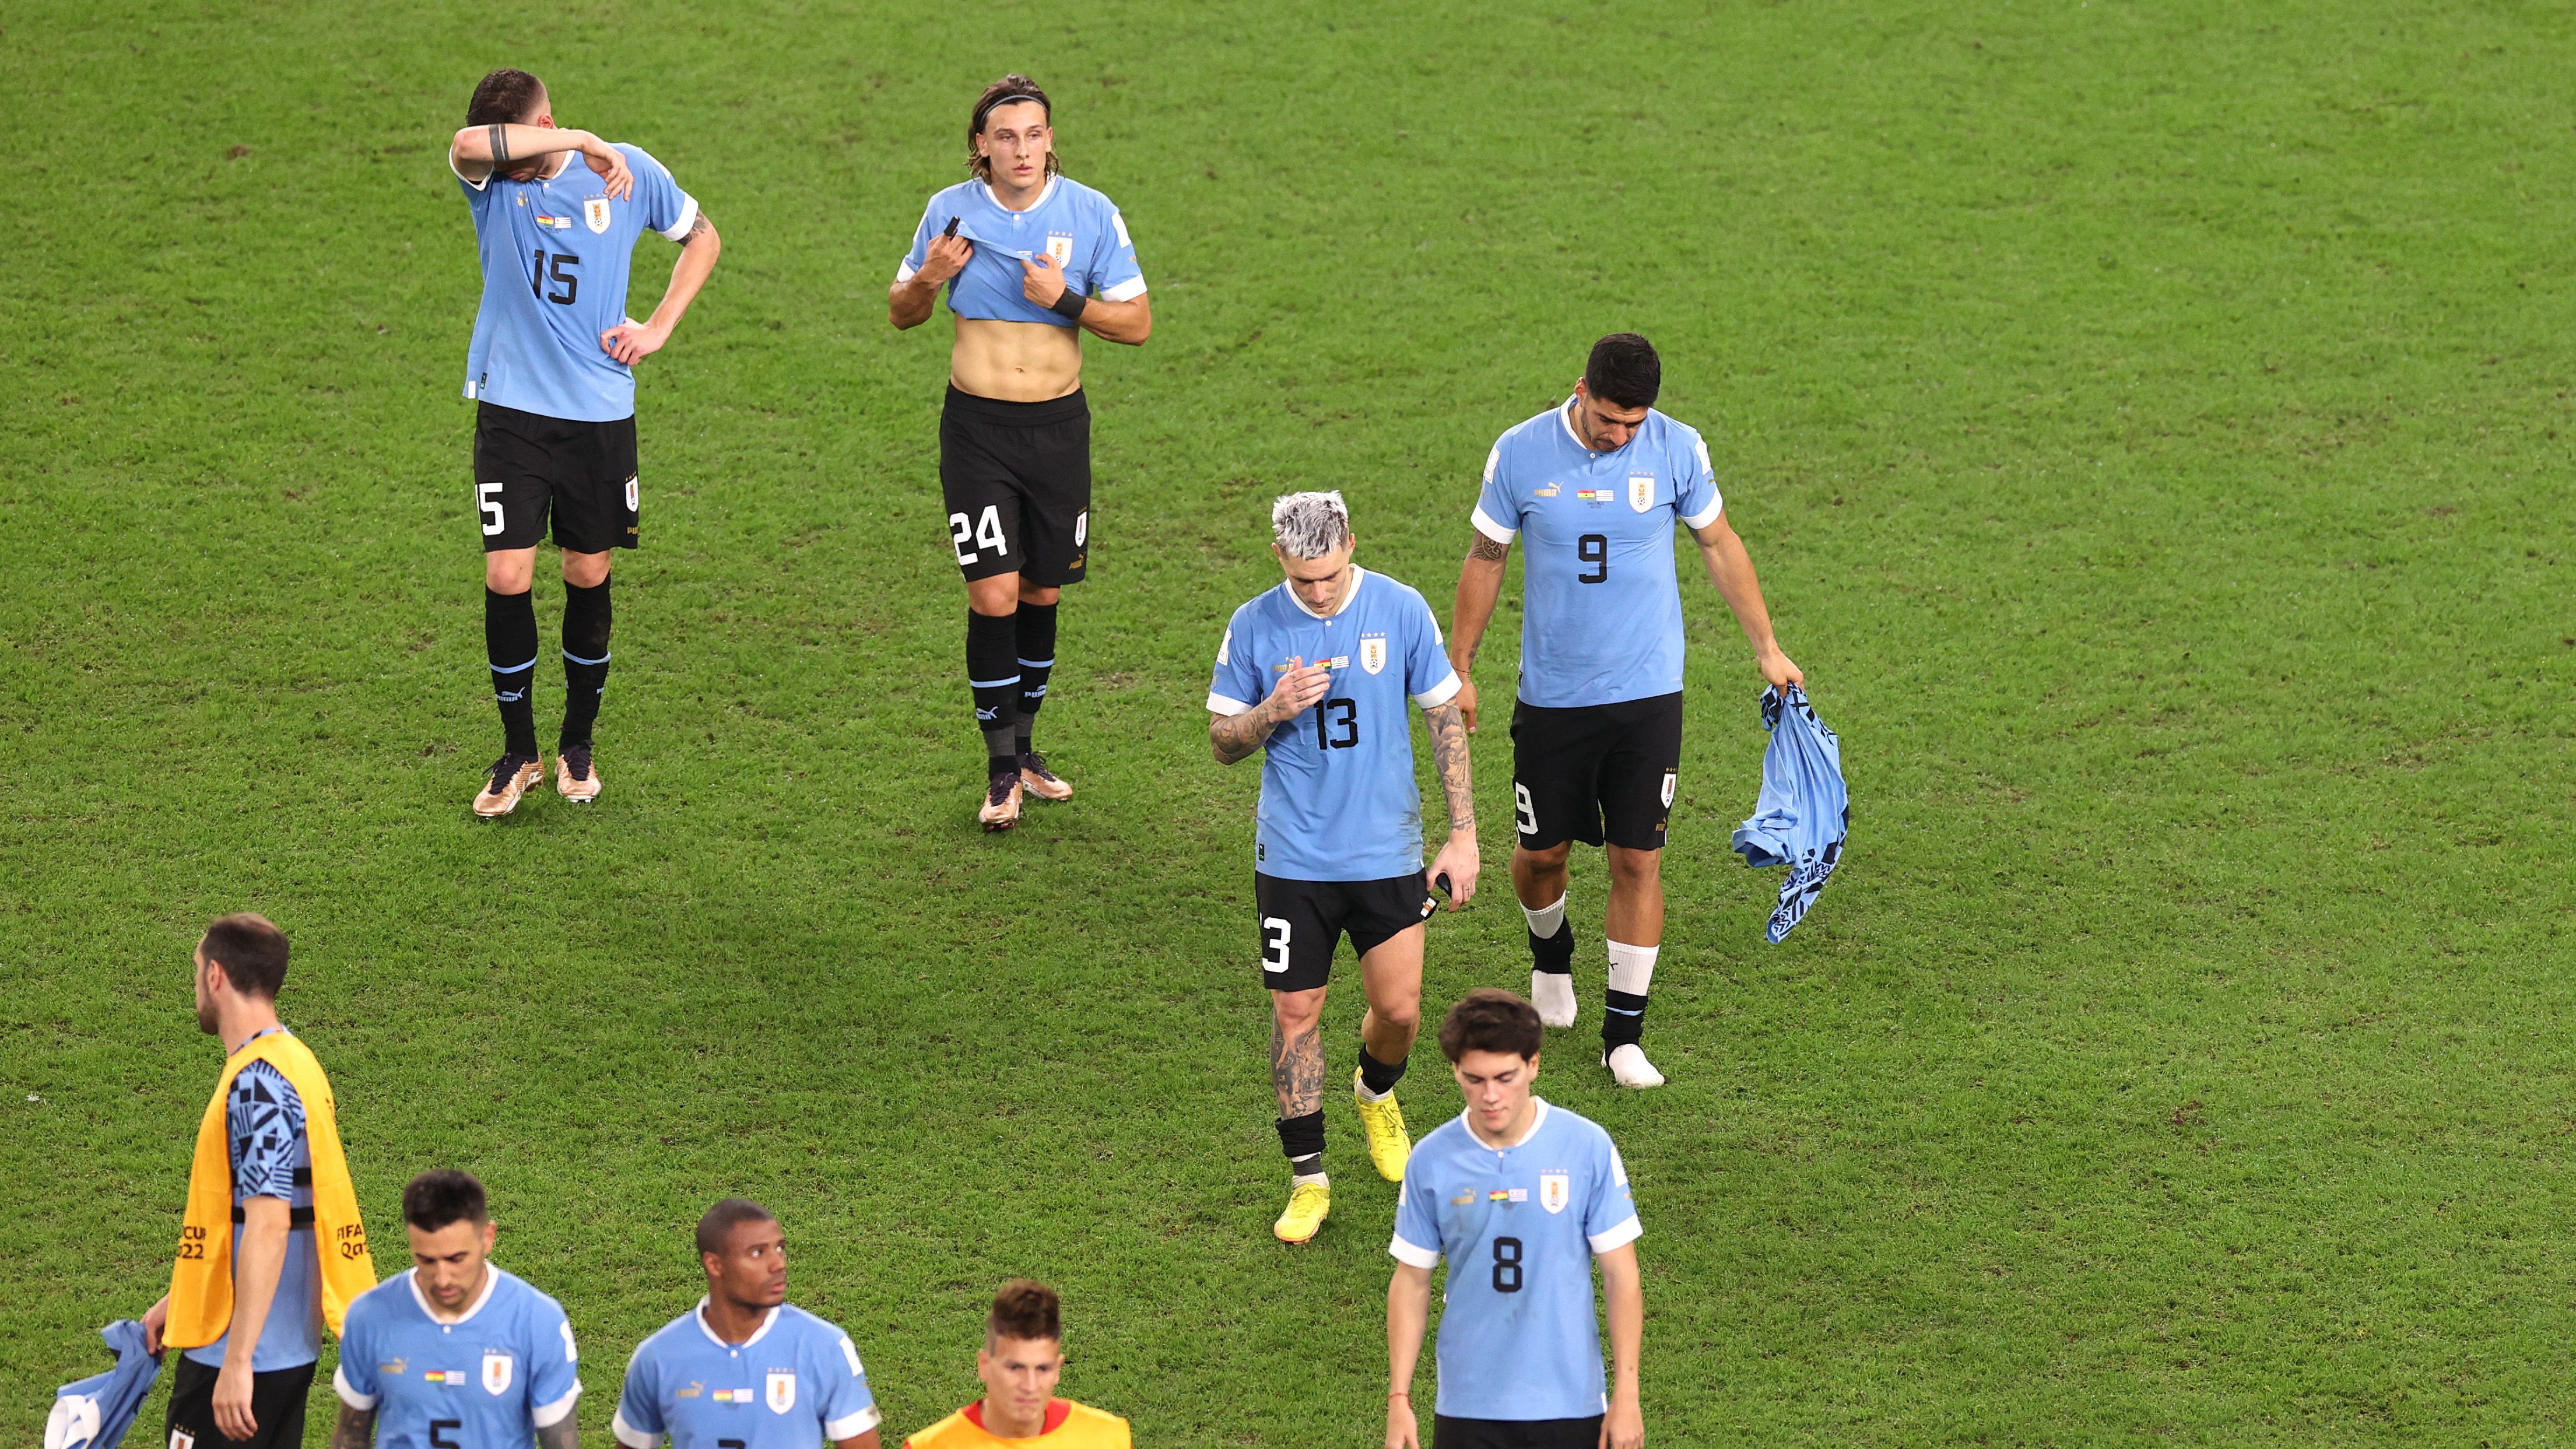 Uruguay crashed in the group stage of the World Cup